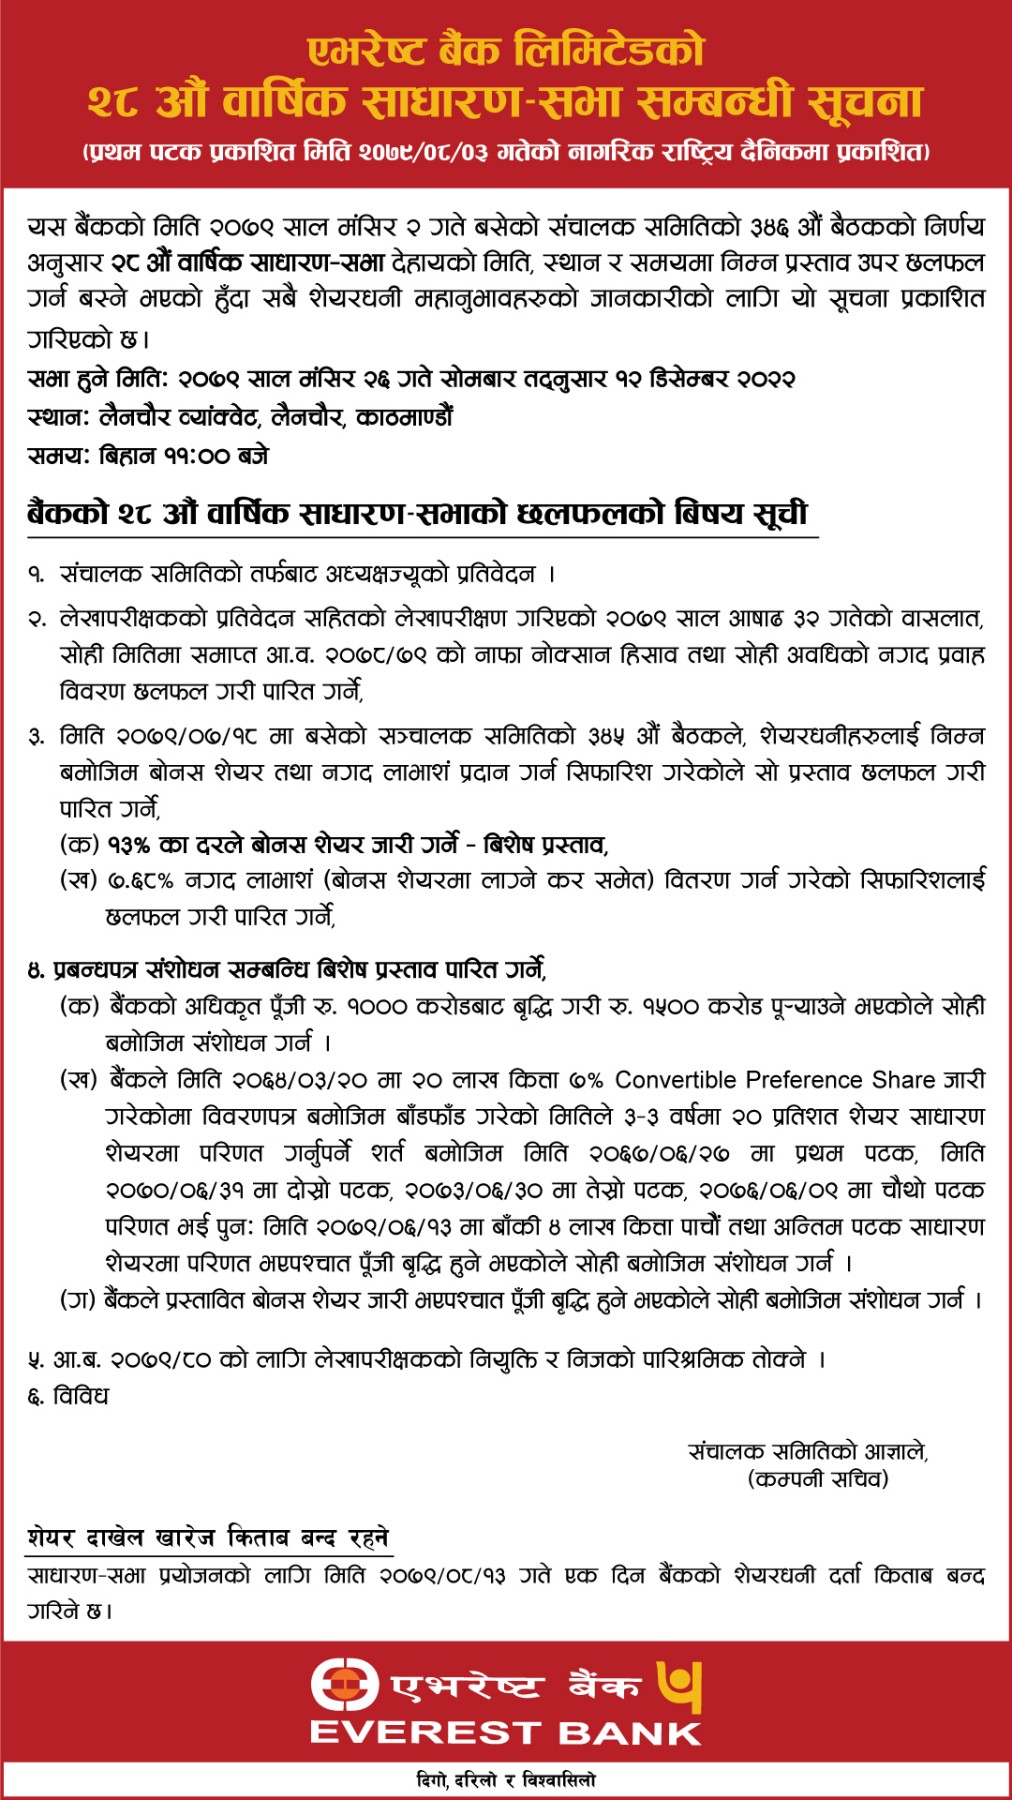 Everest Bank 28th AGM Notice